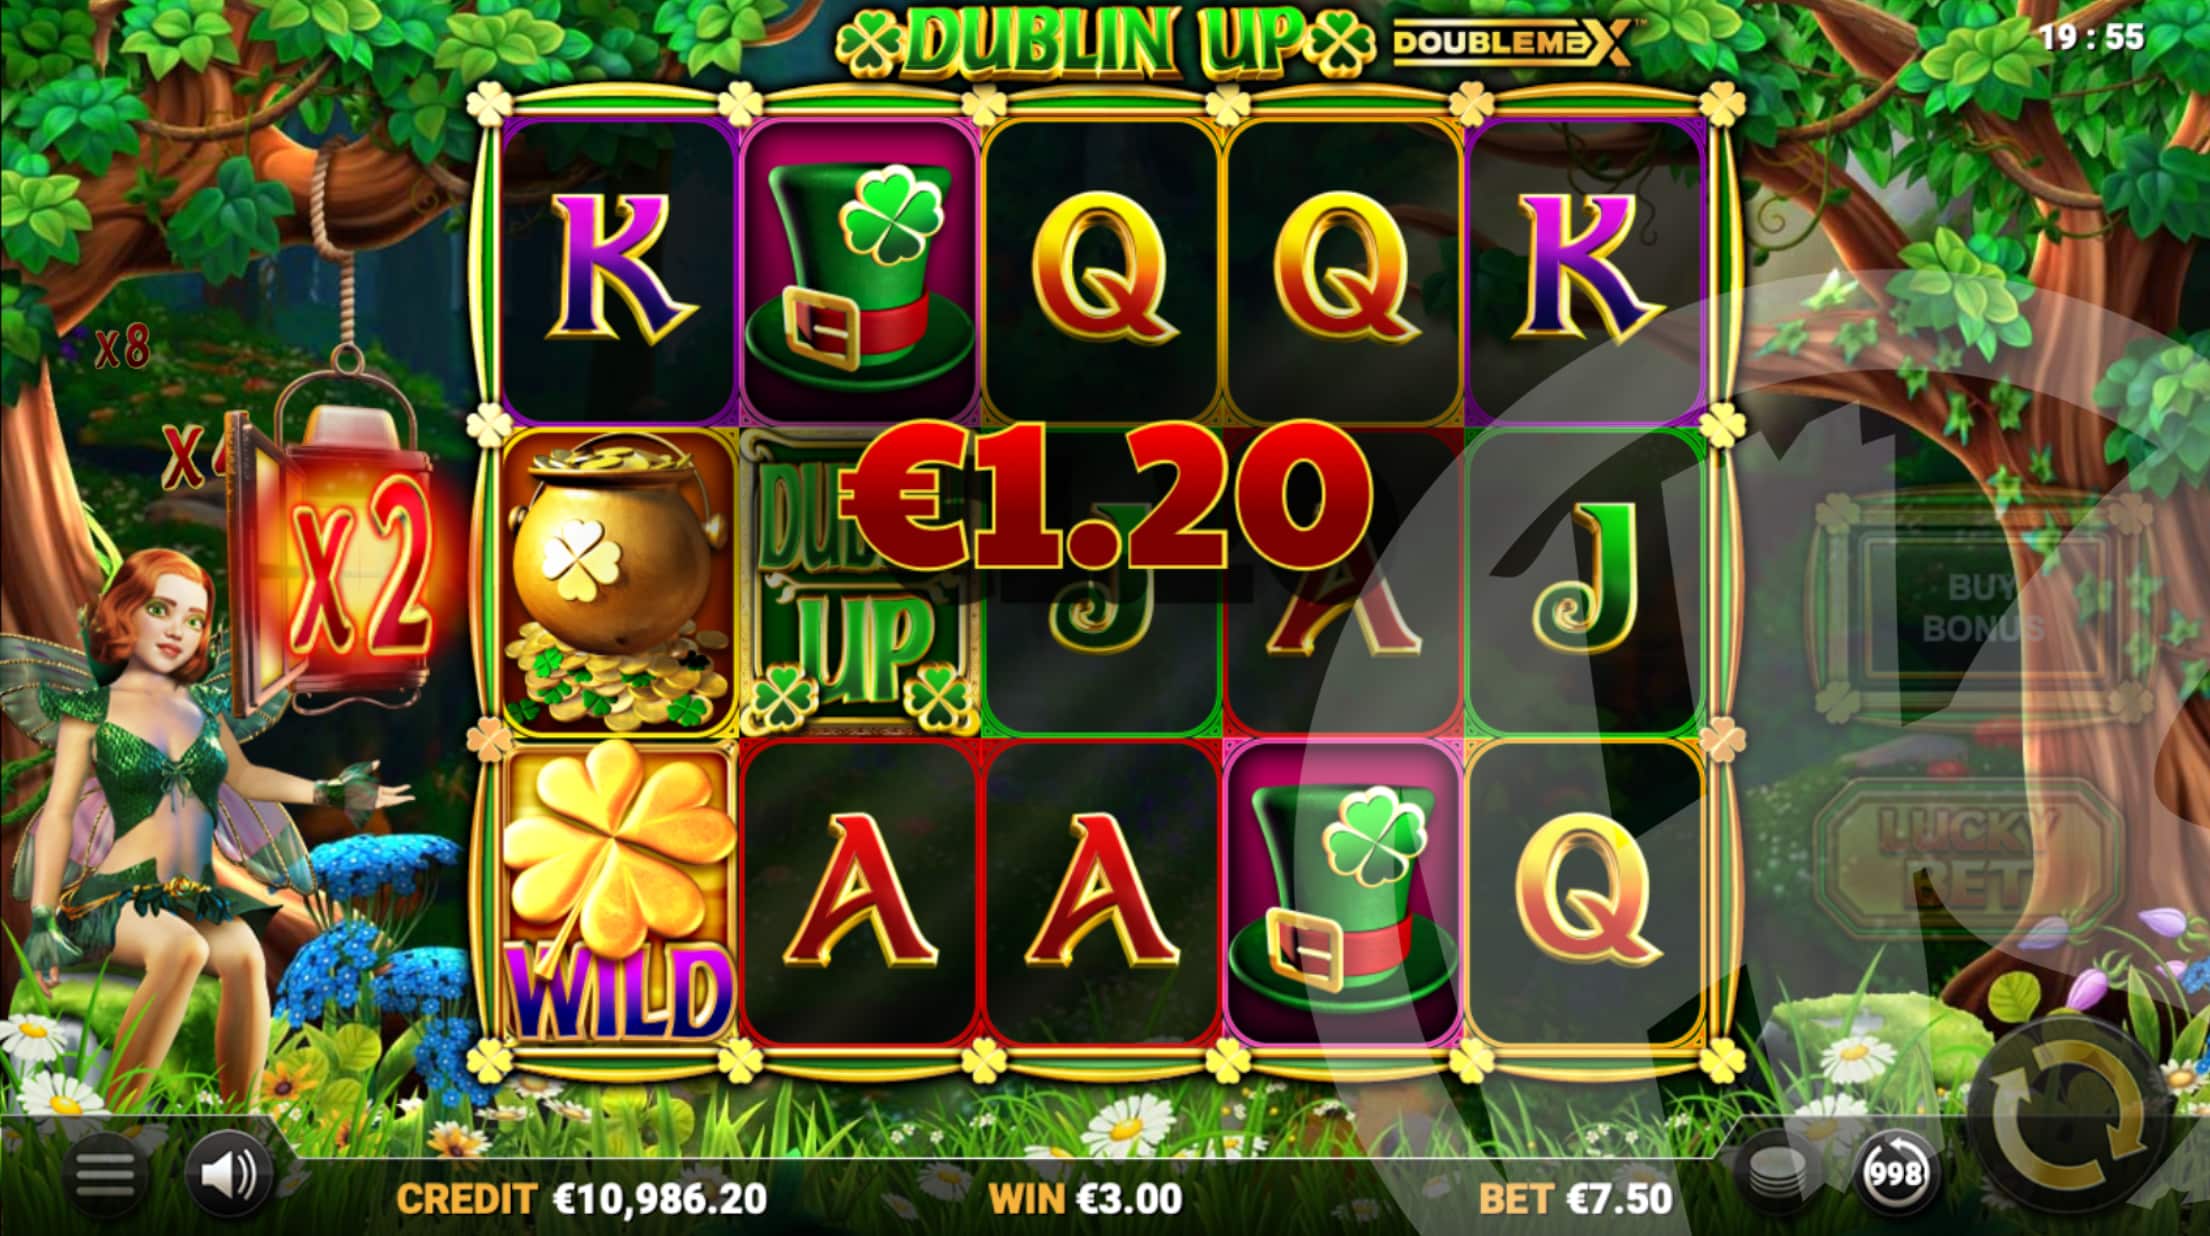 Dublin Up DoubleMax Offers Players 25 Fixed Win Lines